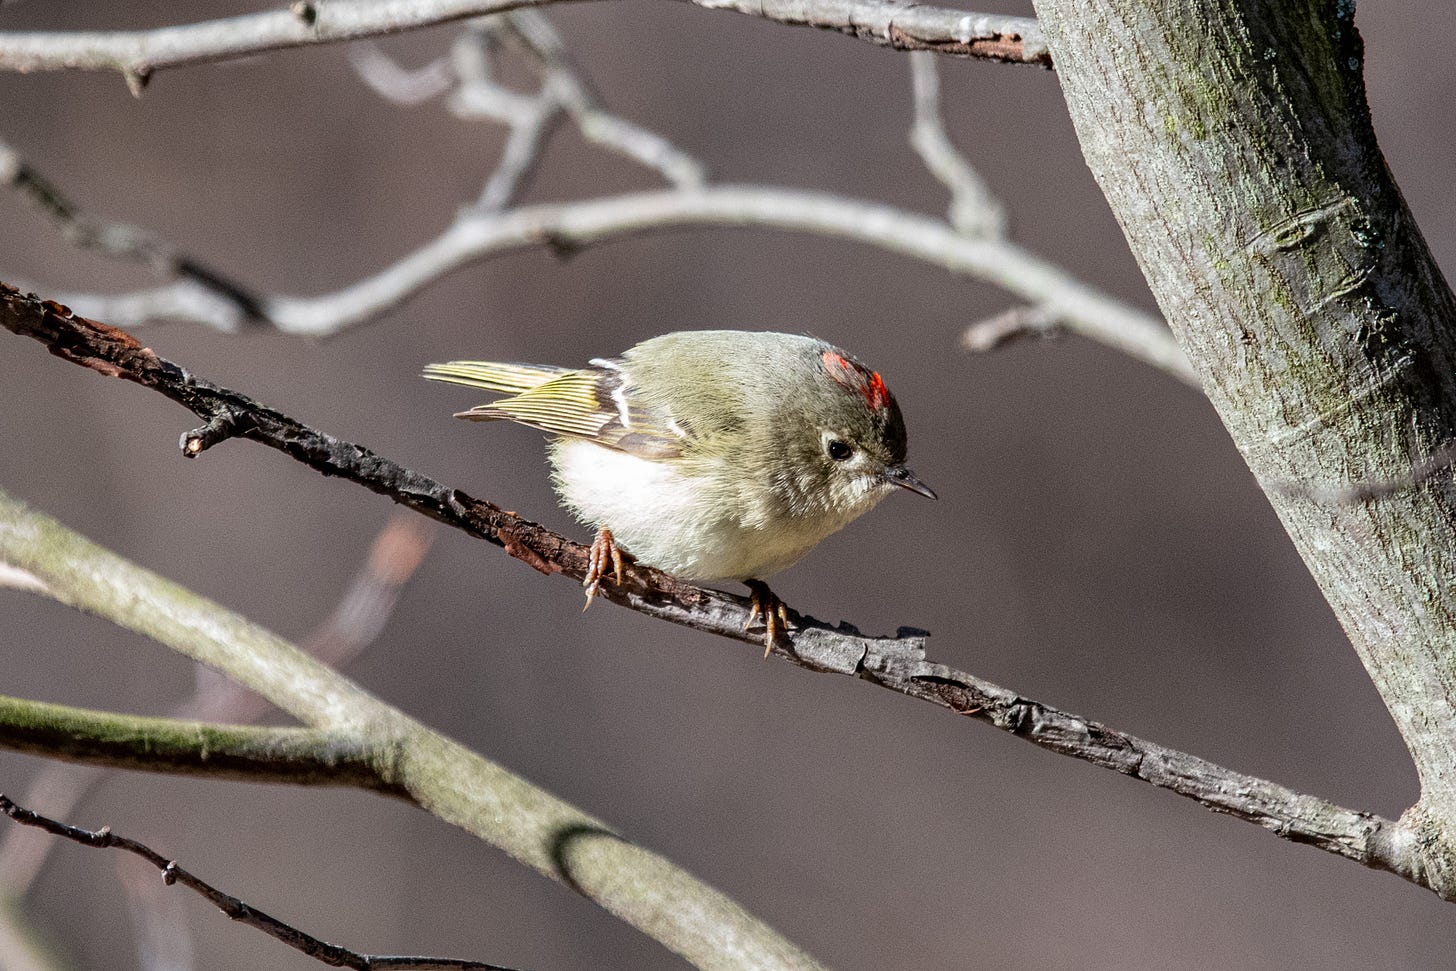 A ruby-crowned kinglet, head bowed, showing its ruby crown